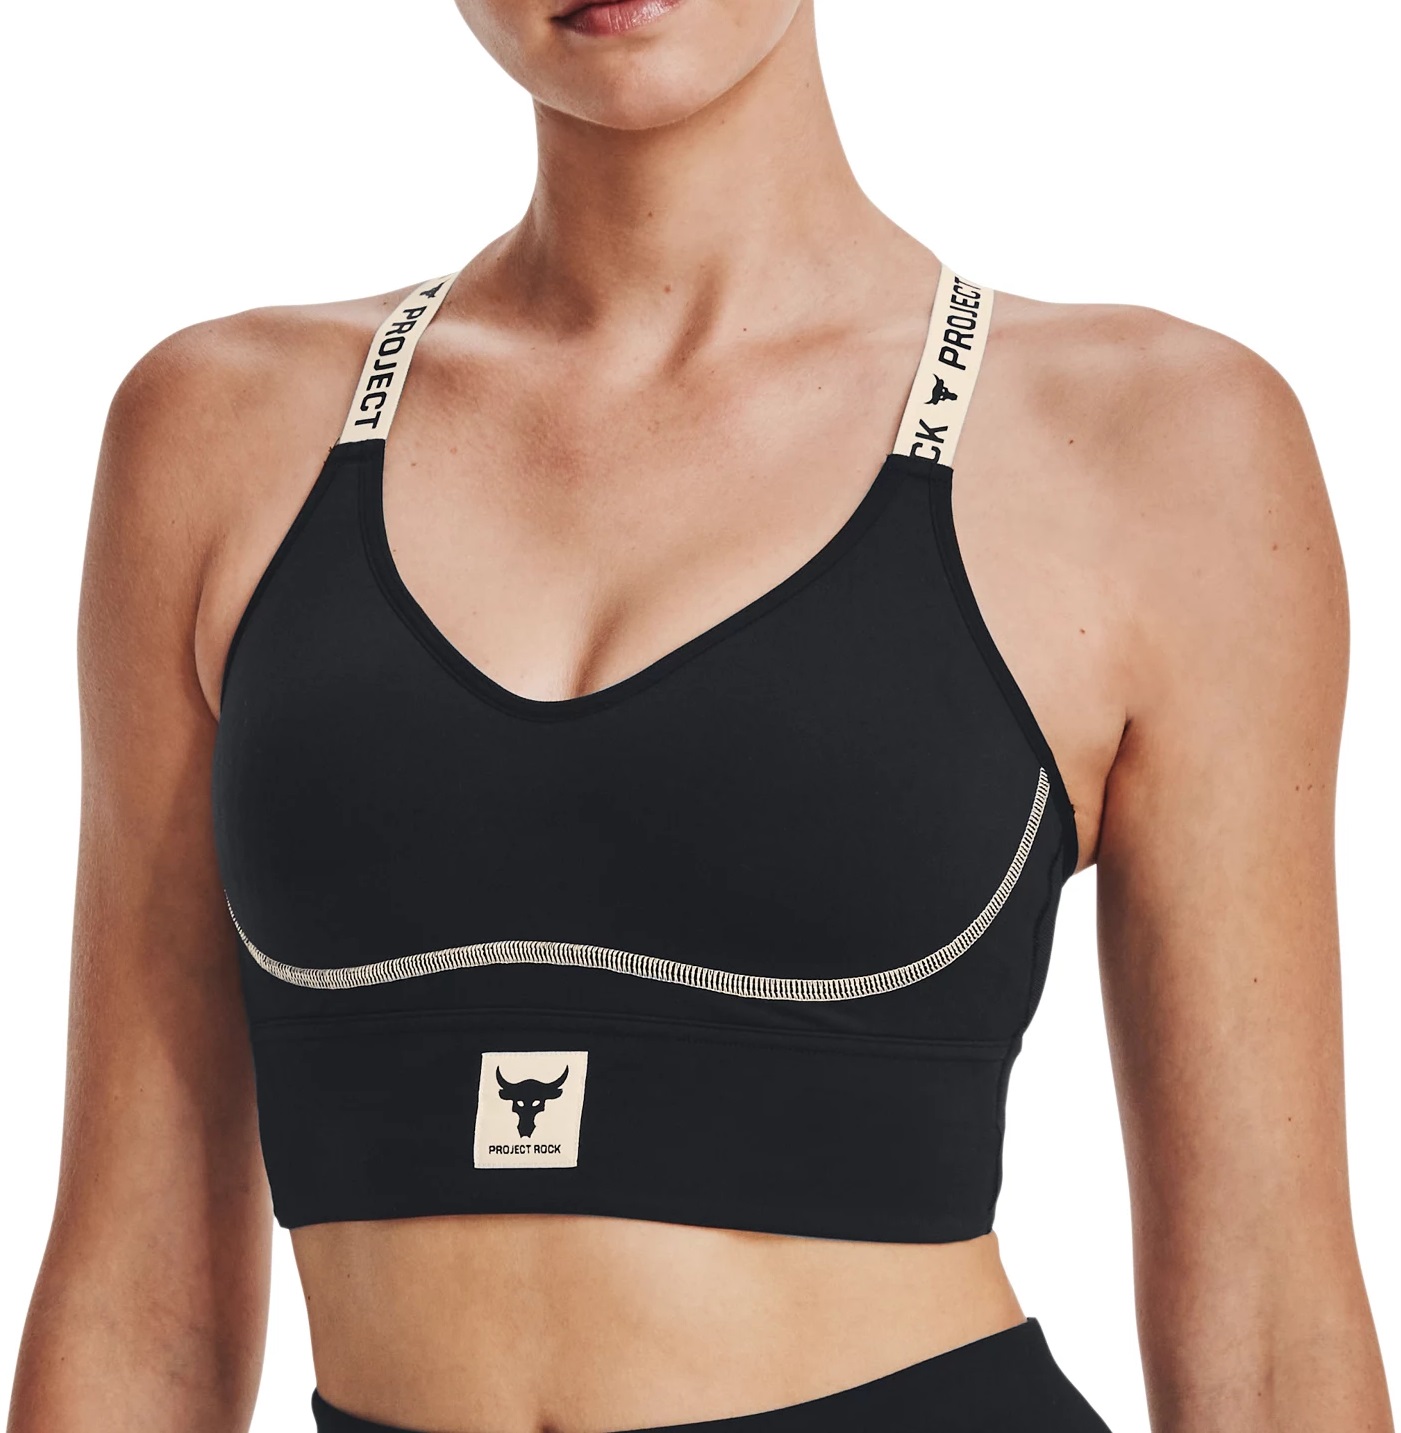 Womens sports bra with support Under Armour PJT ROCK INFTY MID BRA W black